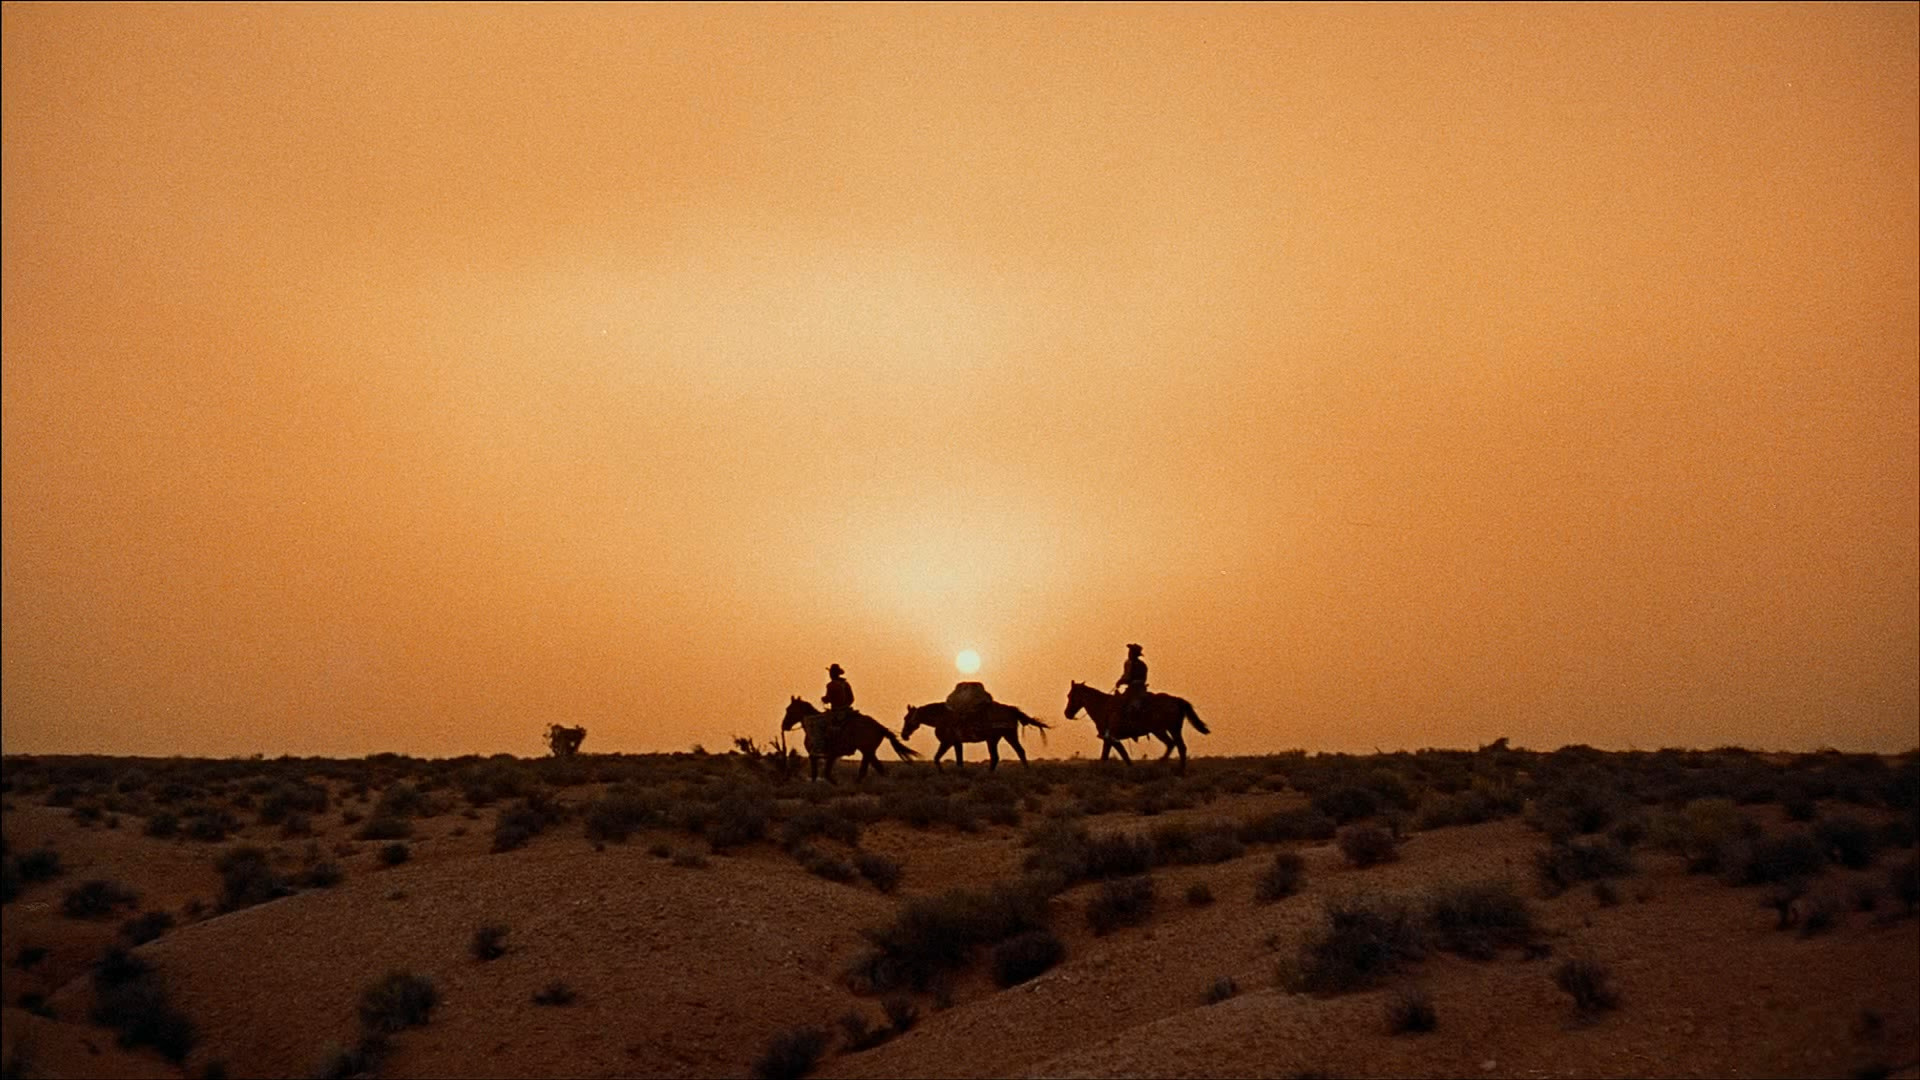 How did “The Searchers” influence future filmmakers